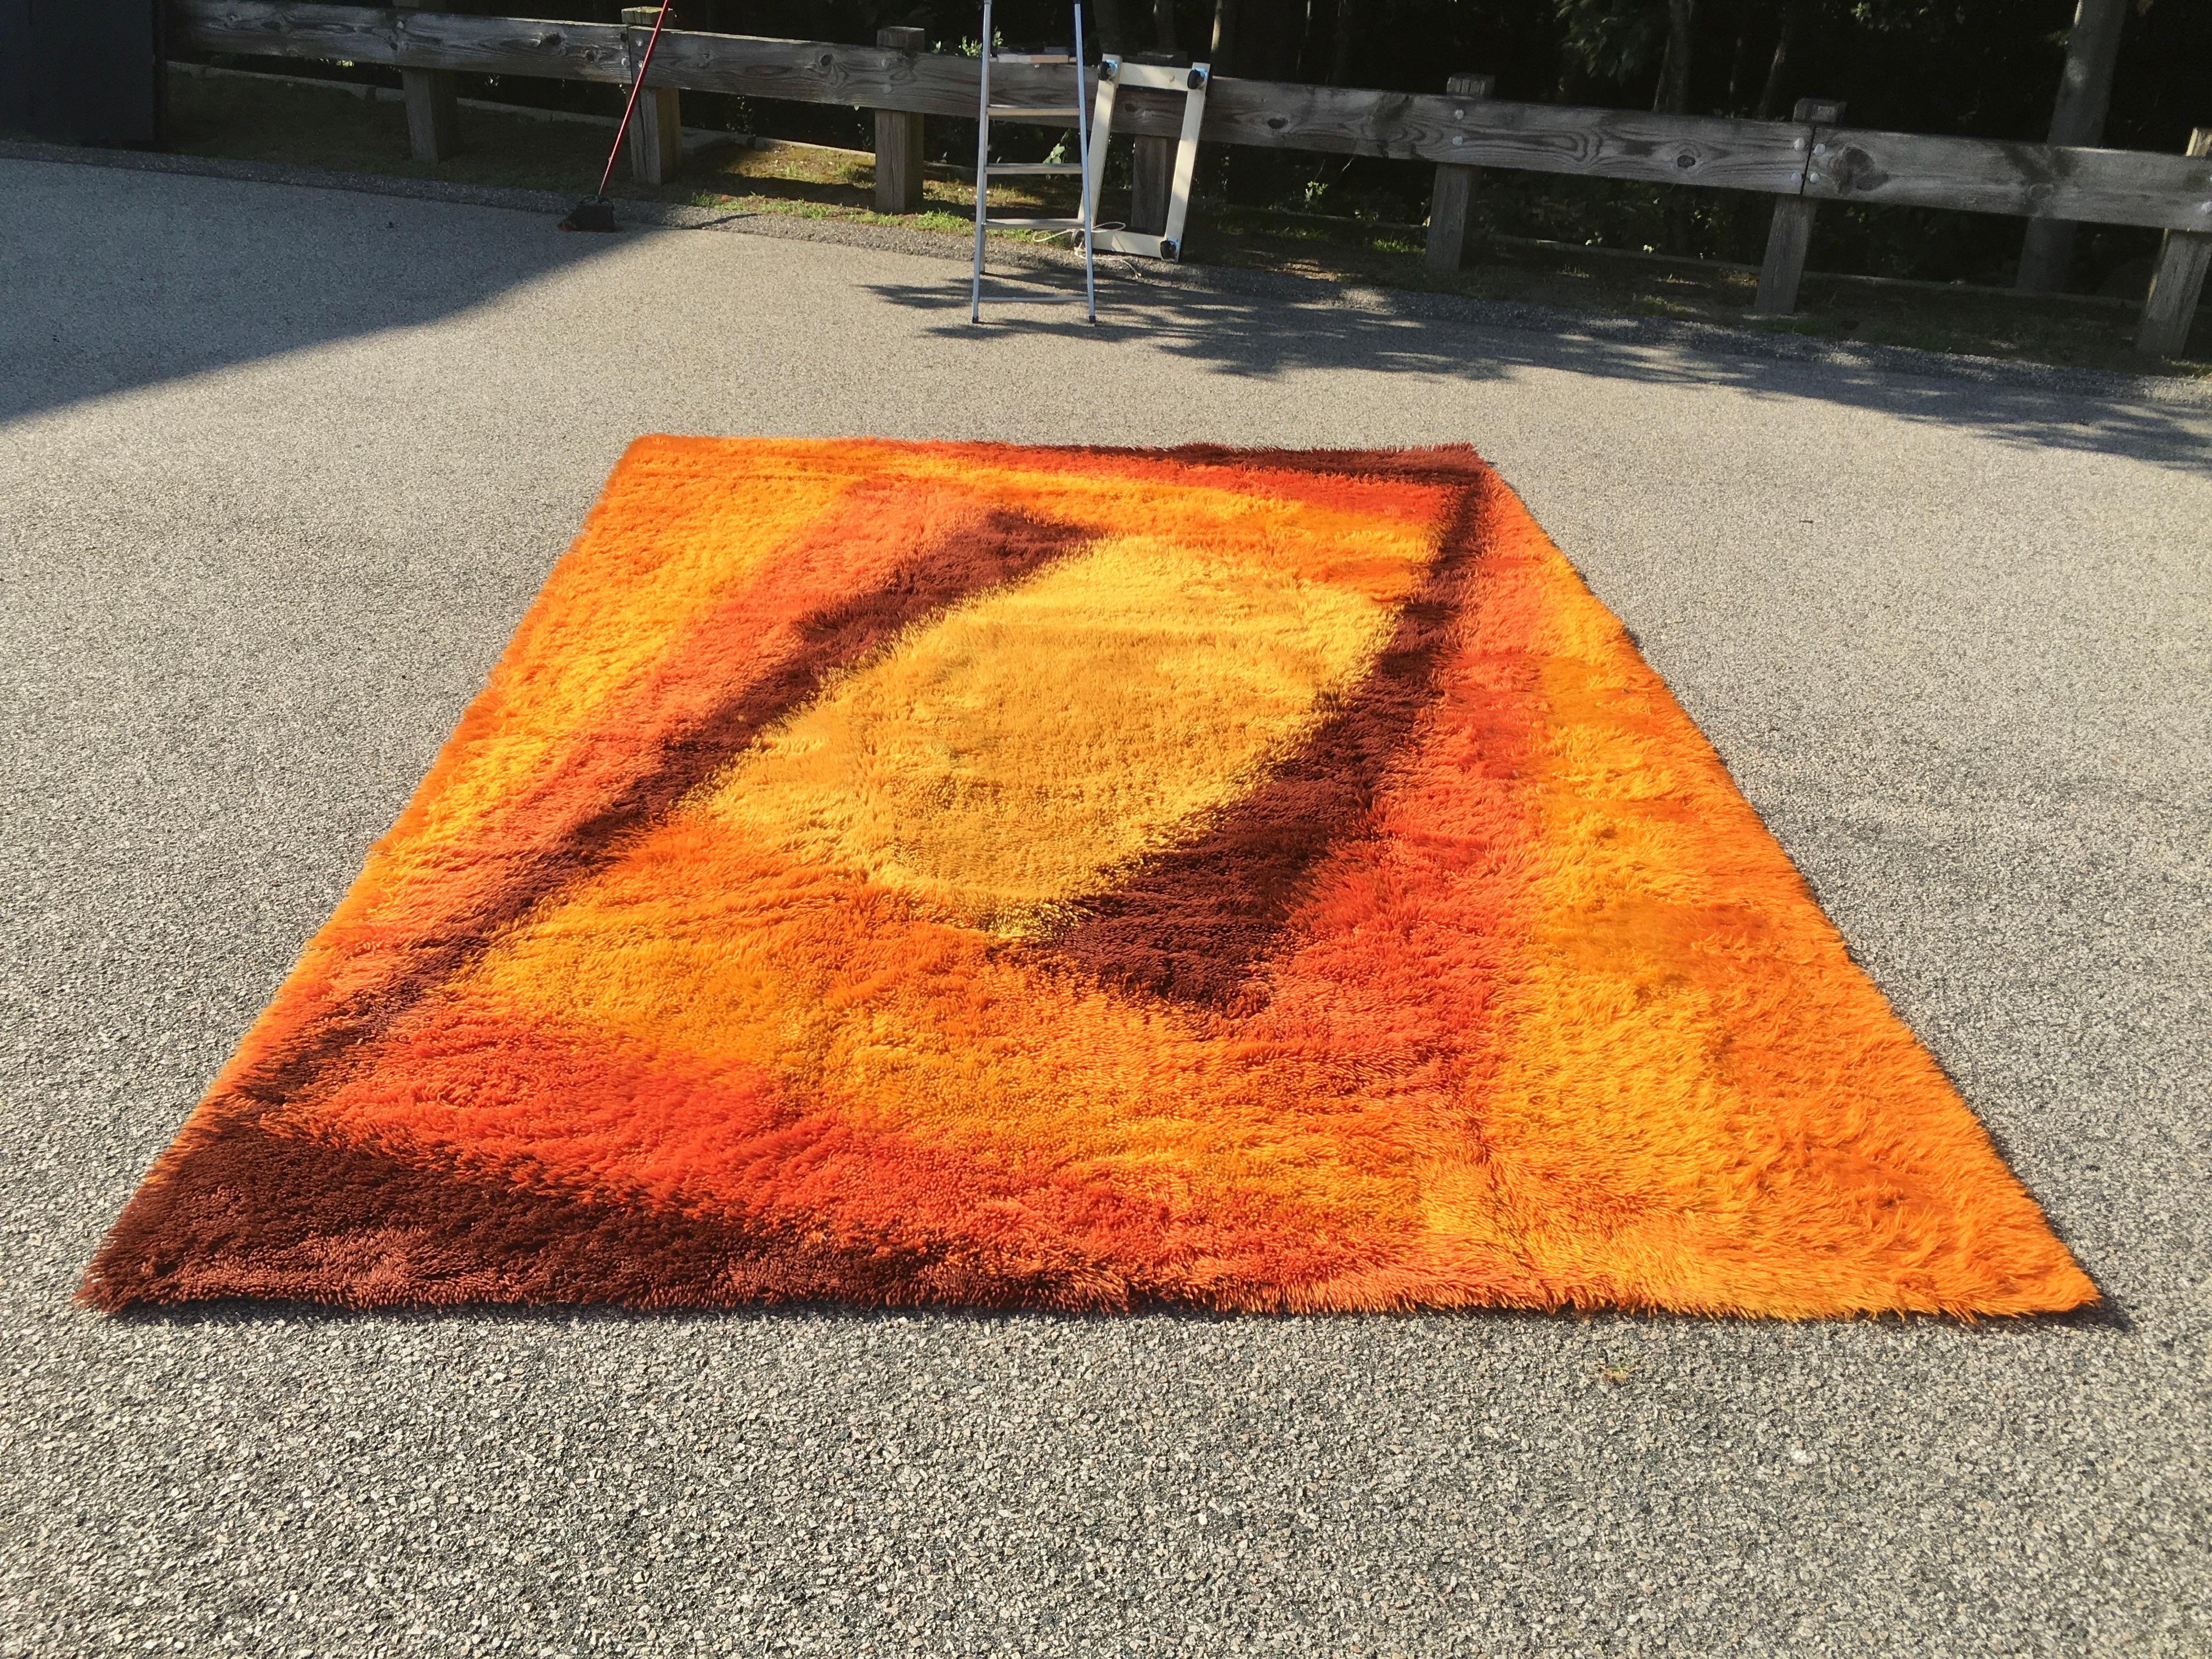 Vintage 1960s wool Rya rug in vibrant yellow, orange and brown abstract design. Expertly woven. Very clean. Ready to place. Actual dimensions: 11'9